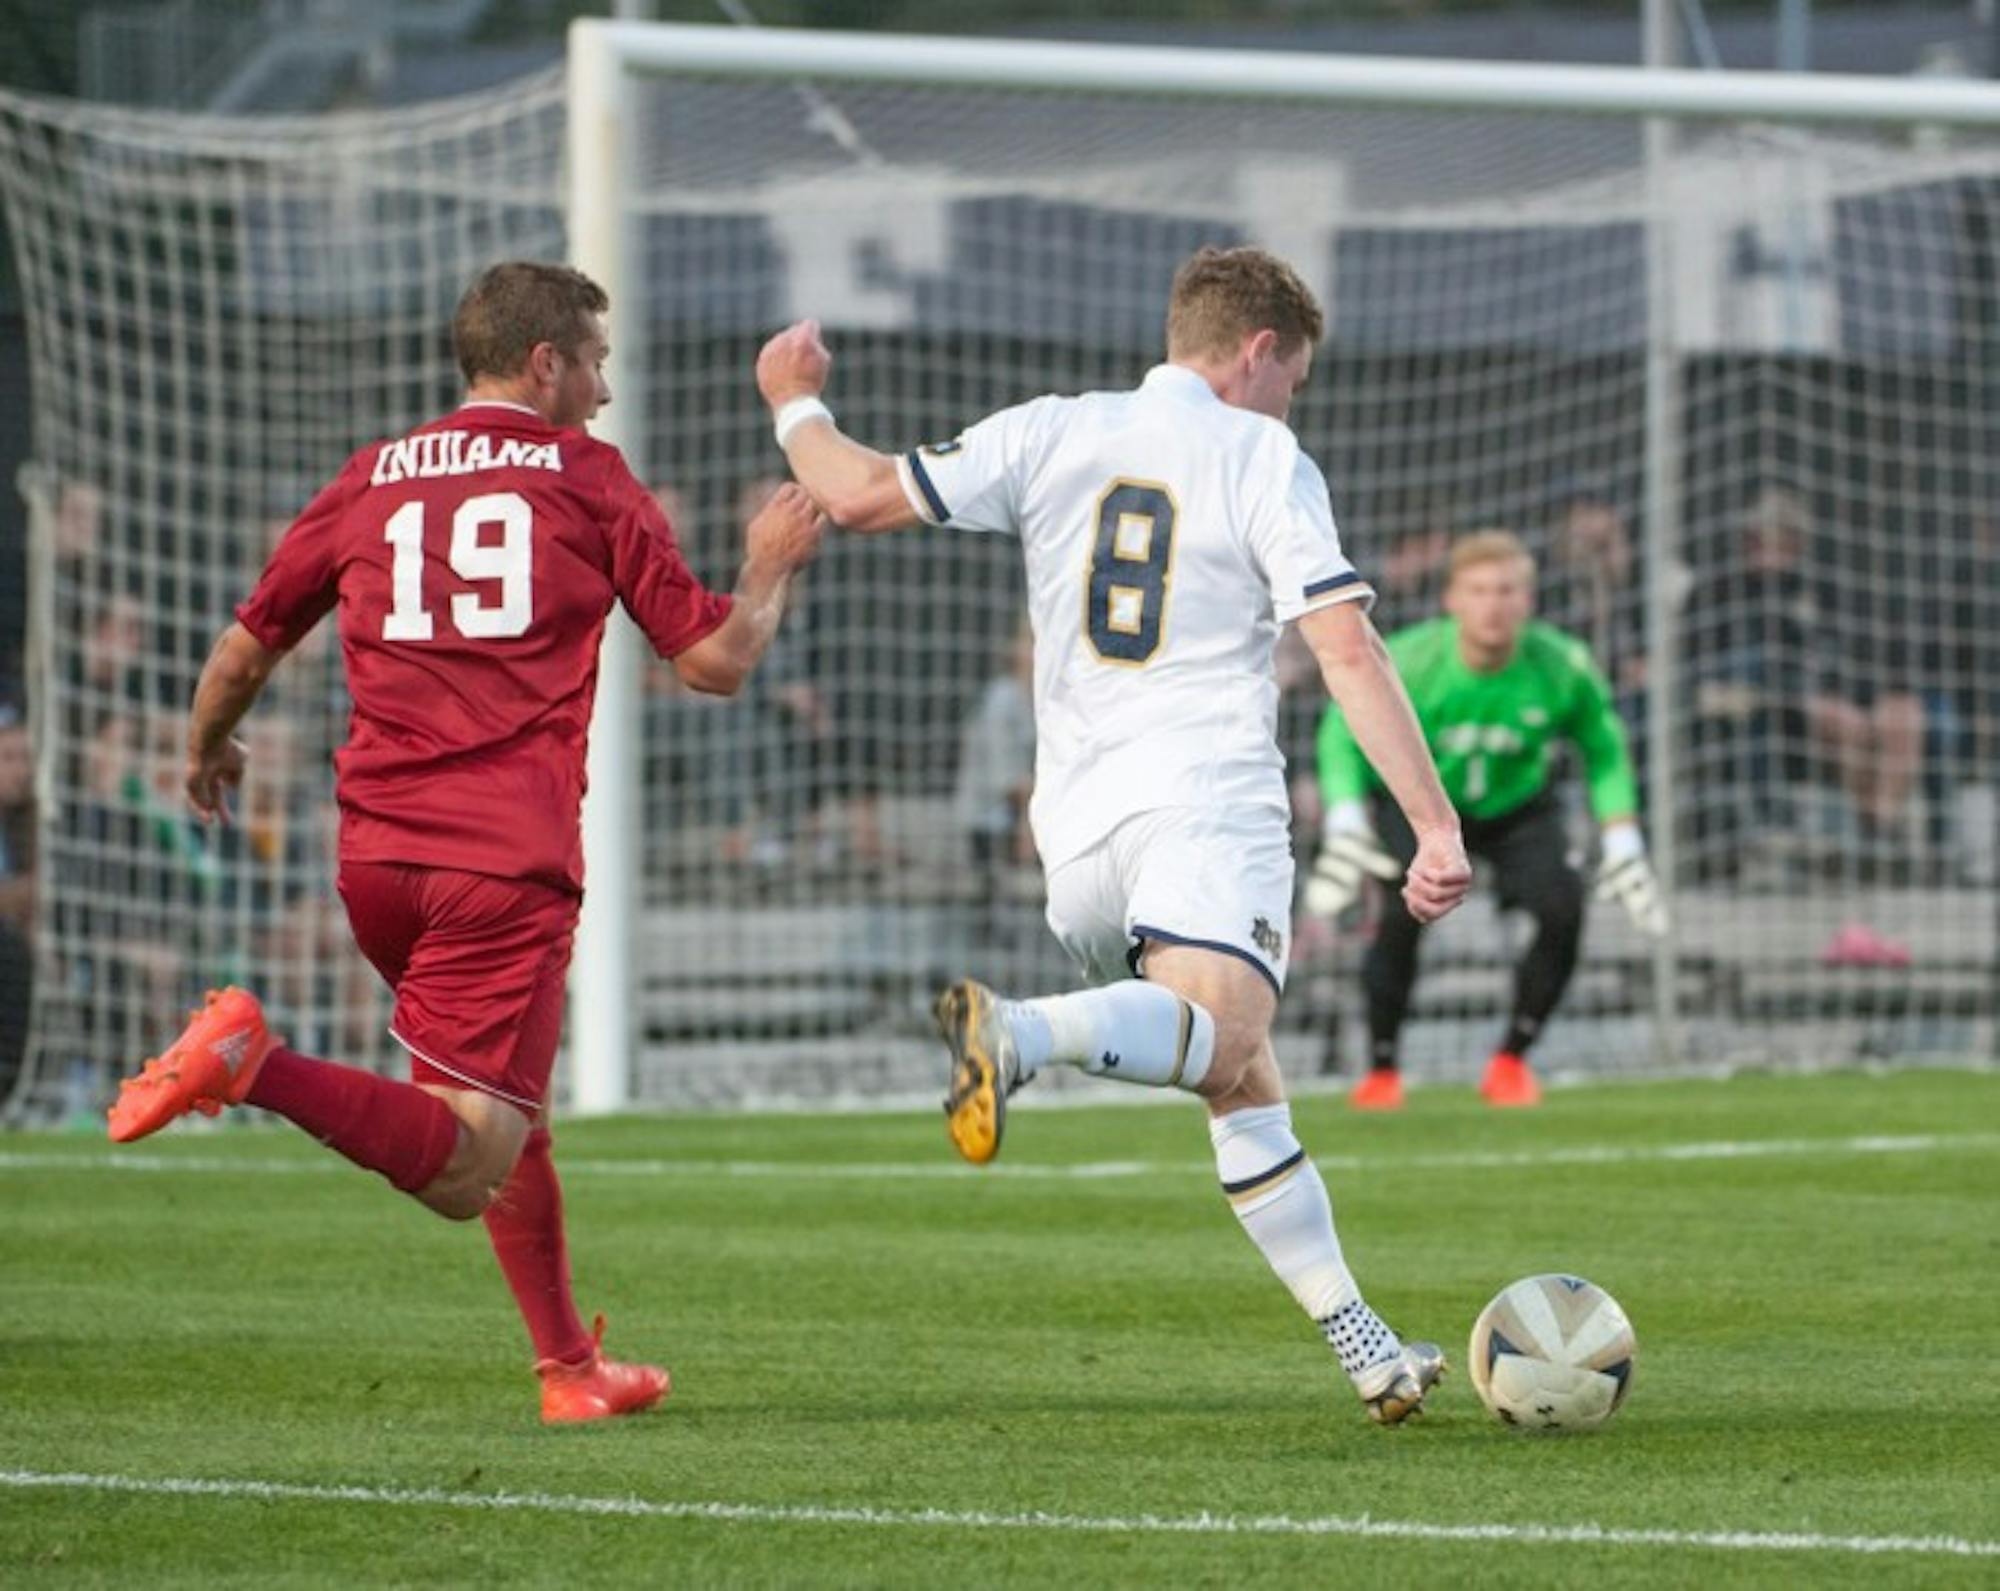 Irish junior forward Jon Gallagher lines up a shot during Notre Dame’s 4-0 victory over Indiana on Oct. 4 at Alumni Stadium.